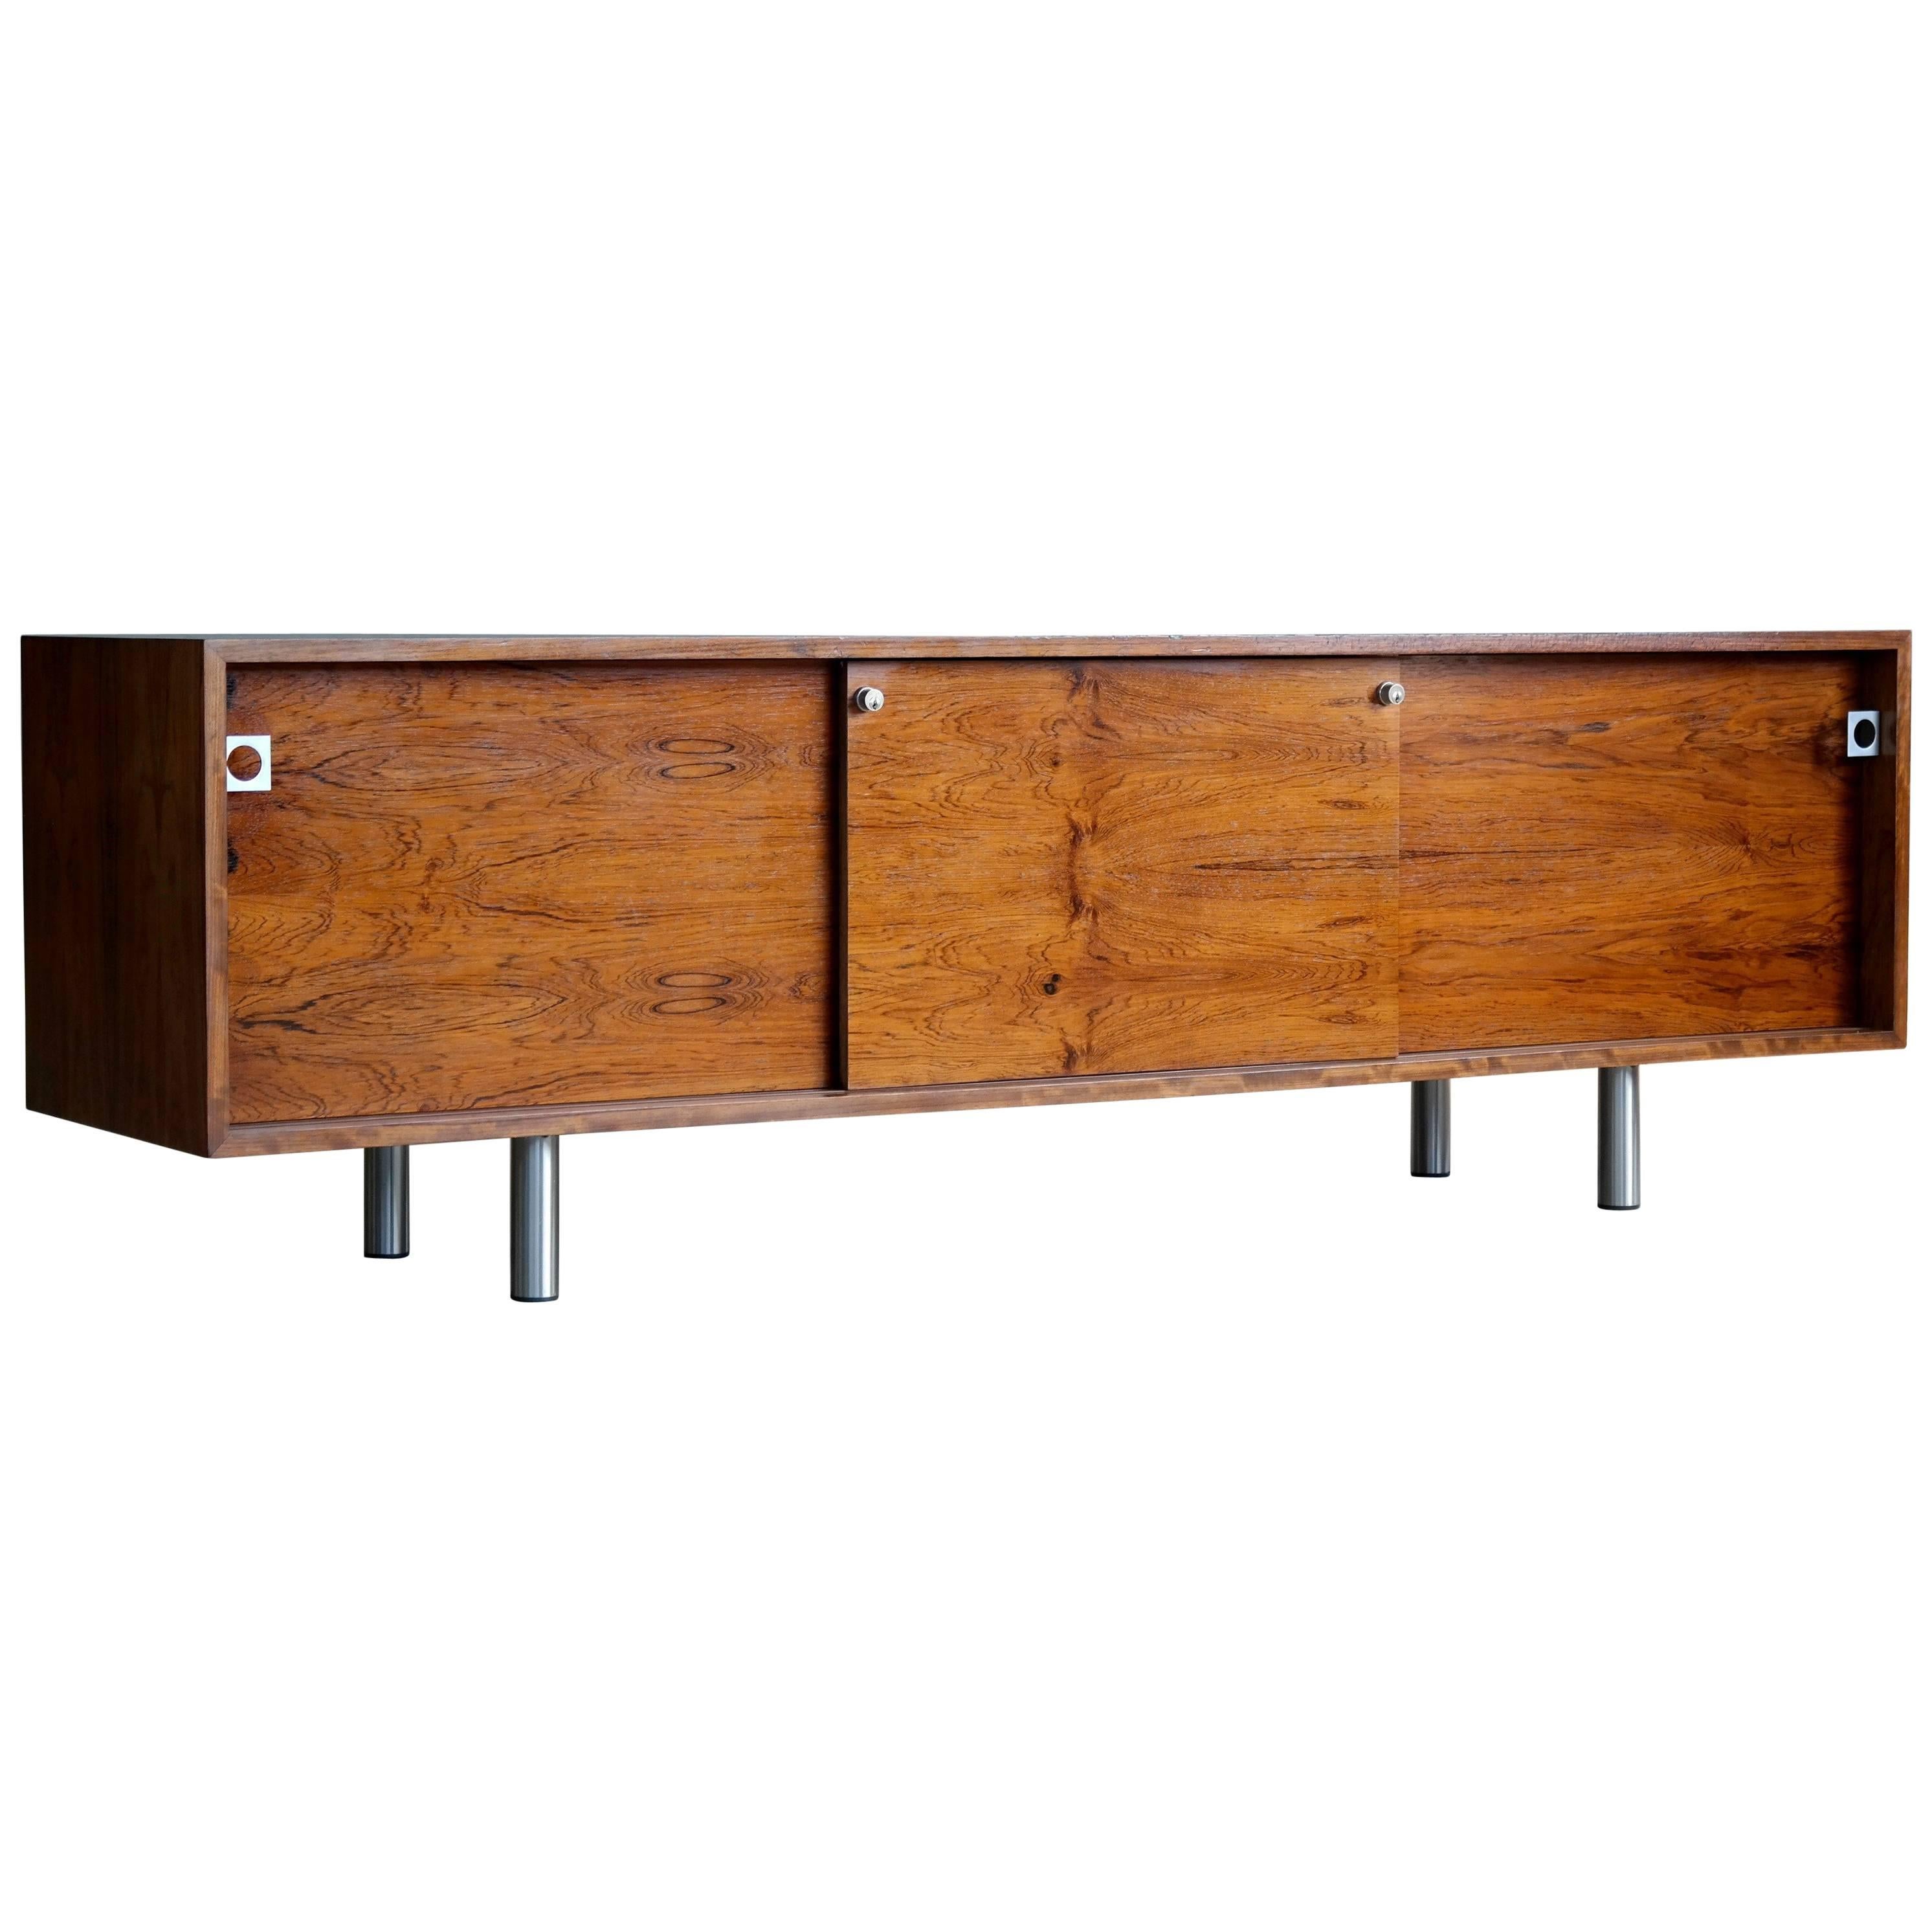 Danish 1960s Low Credenza in Rosewood by Bodil Kjaer for E. Pedersen and Son